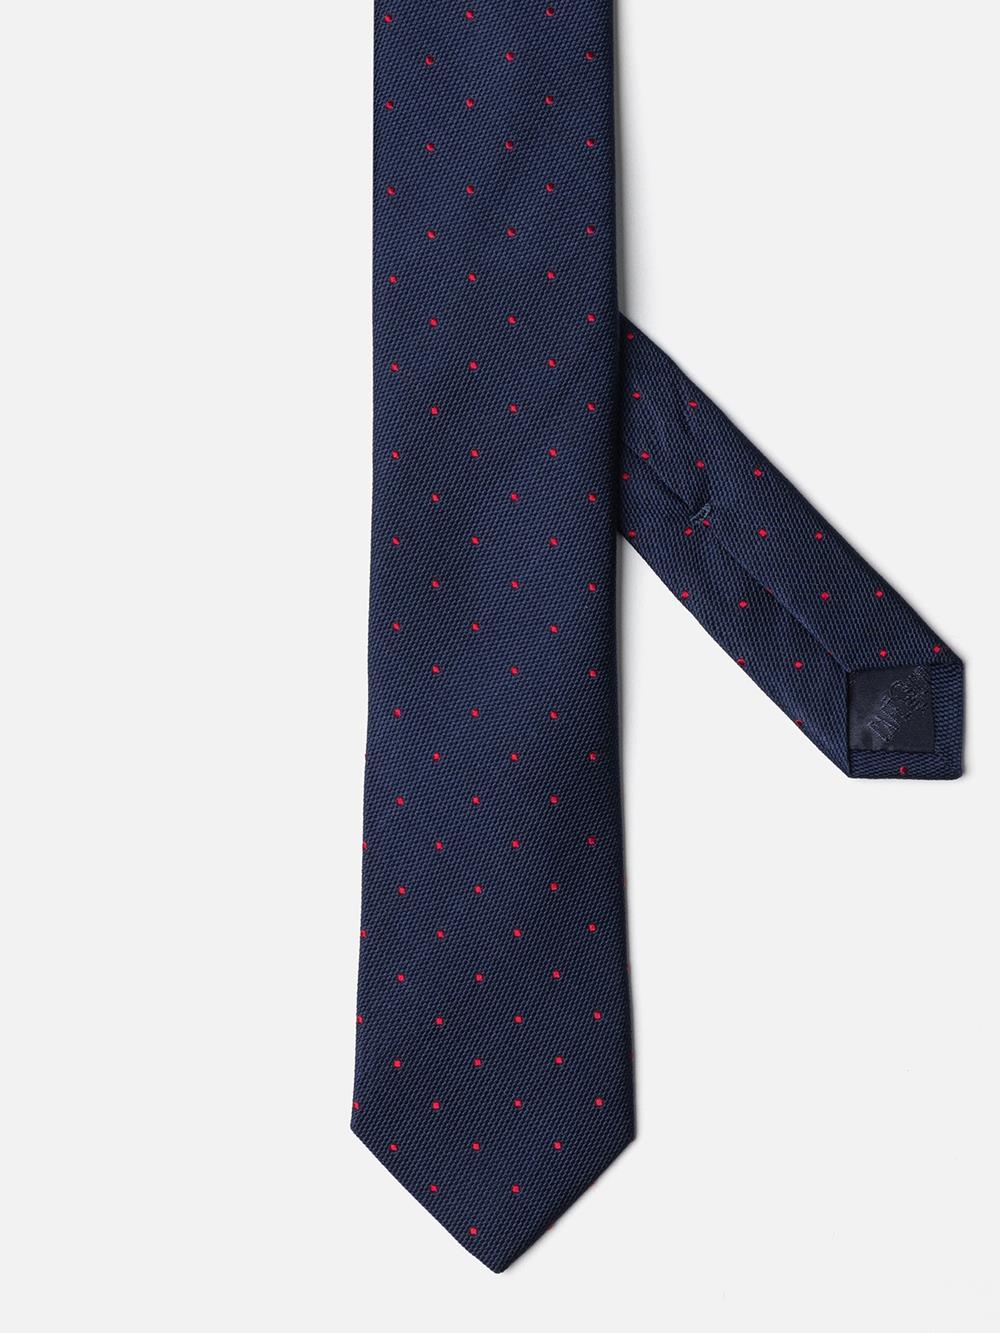 Slim silk tie with red polka dots